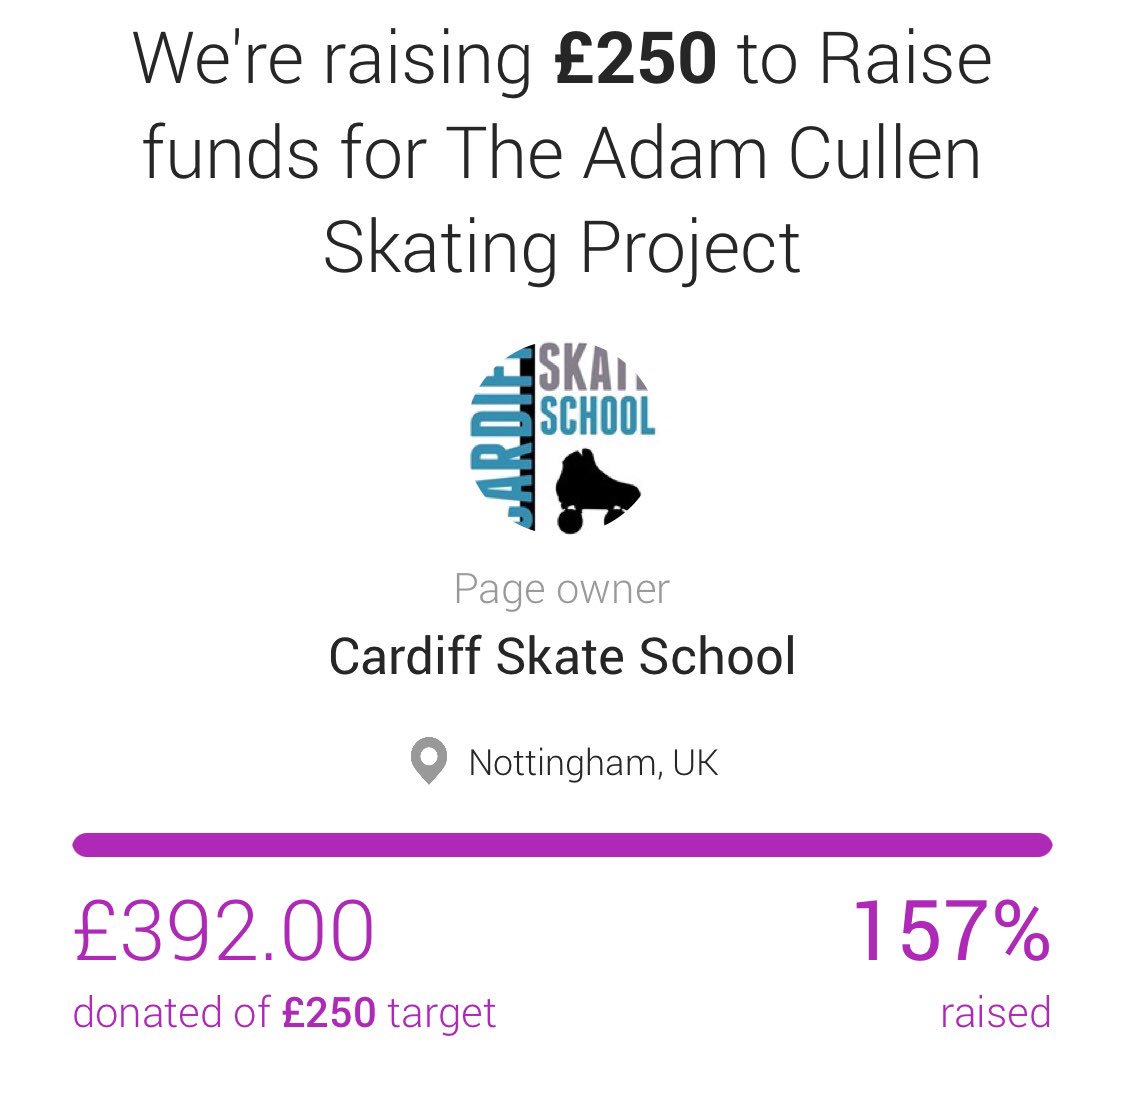 We have raised a massive £392 for The Adam Cullen Skating Project

THANK YOU!! Overwhelmed by the support. Now for me to do my bit tomorrow 😱 I can’t wait 😊 #RunTheDiff #CardiffHalf #theadamcullenskatingproject # #disabledsports #disabilityispossibility